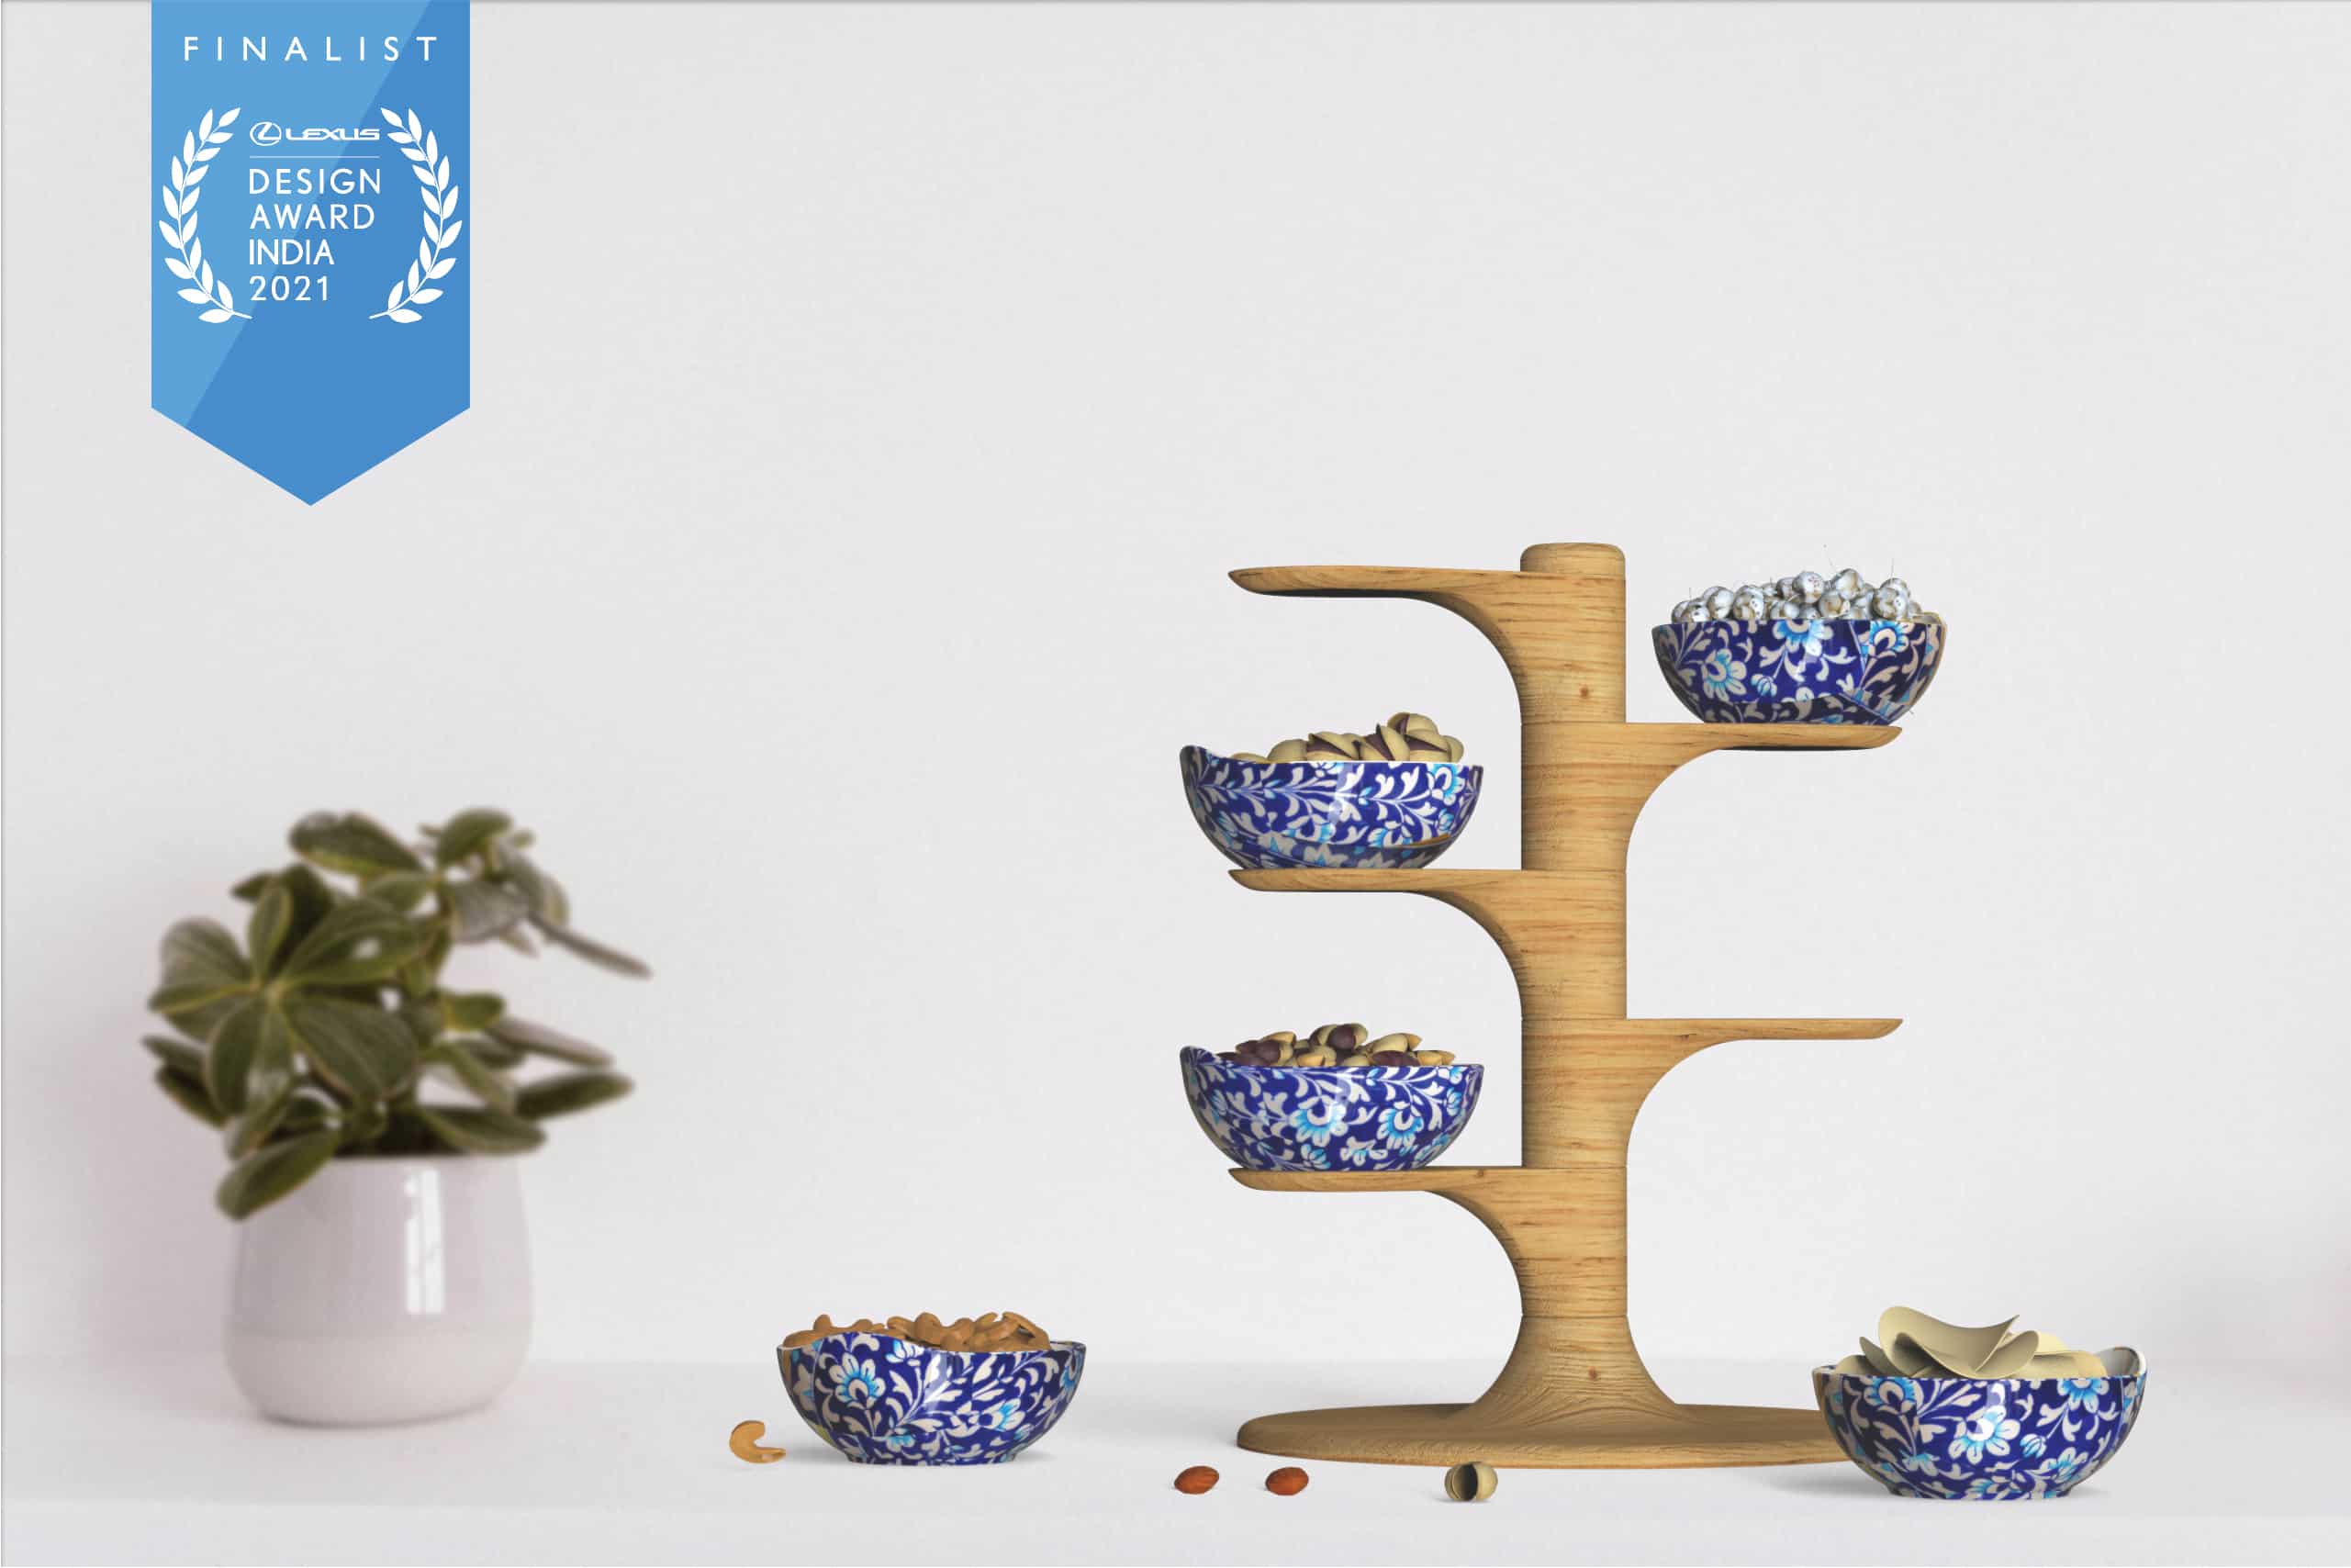 Bahi - An assembly of stackable nut bowls